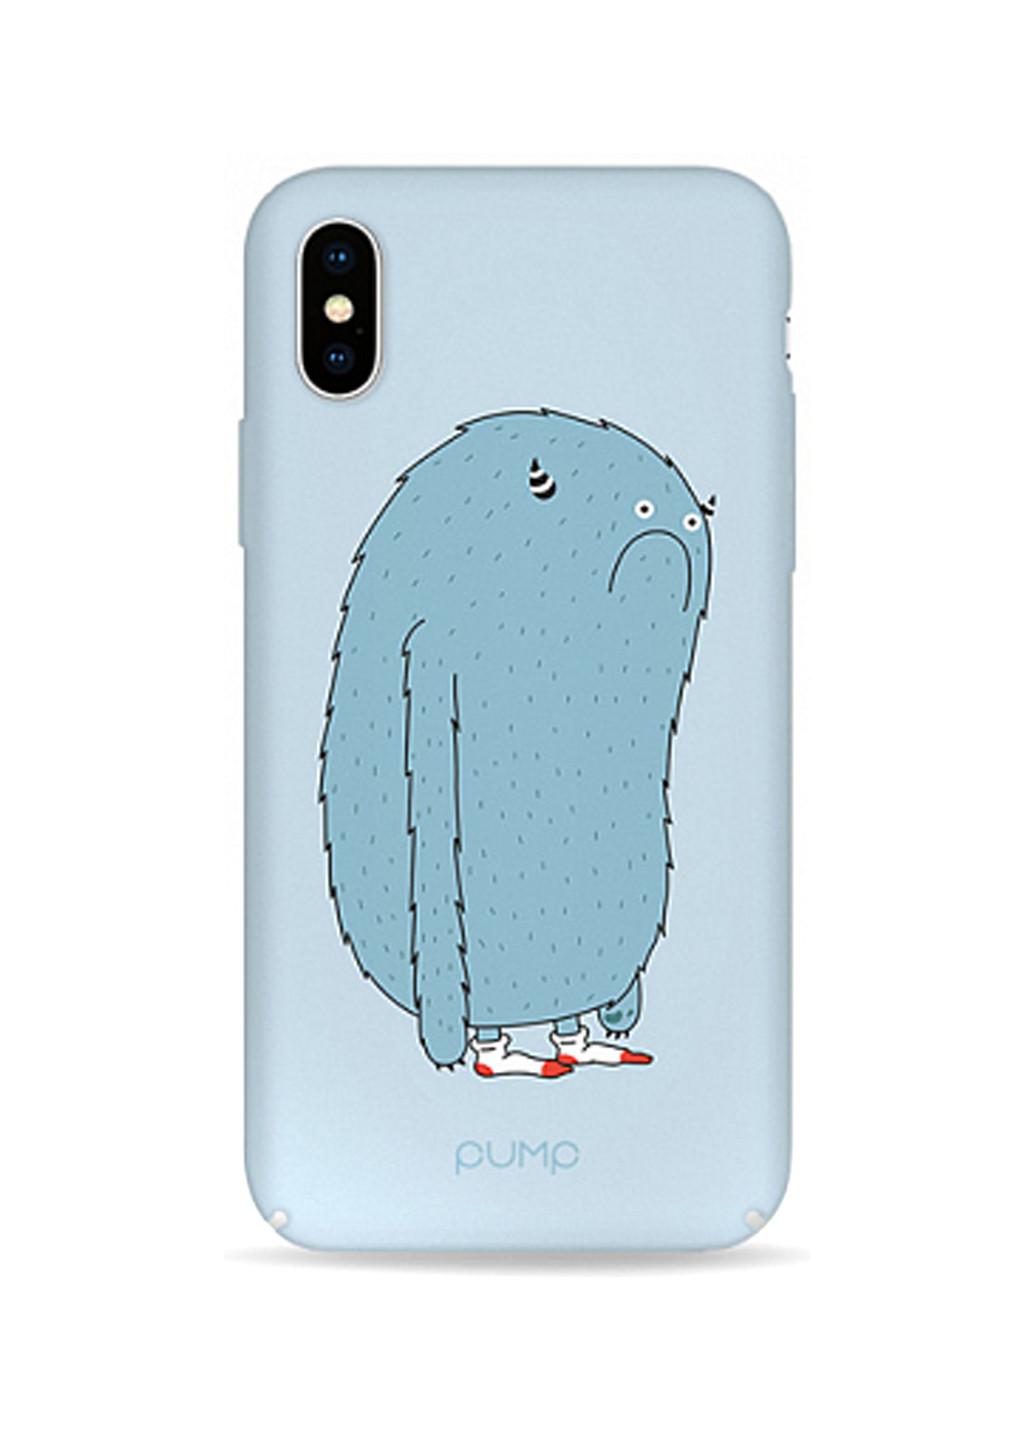 Чехол Tender Touch Case for iPhone X/XS Blue Monster Pump tender touch case для iphone x/xs blue monster (136994079)